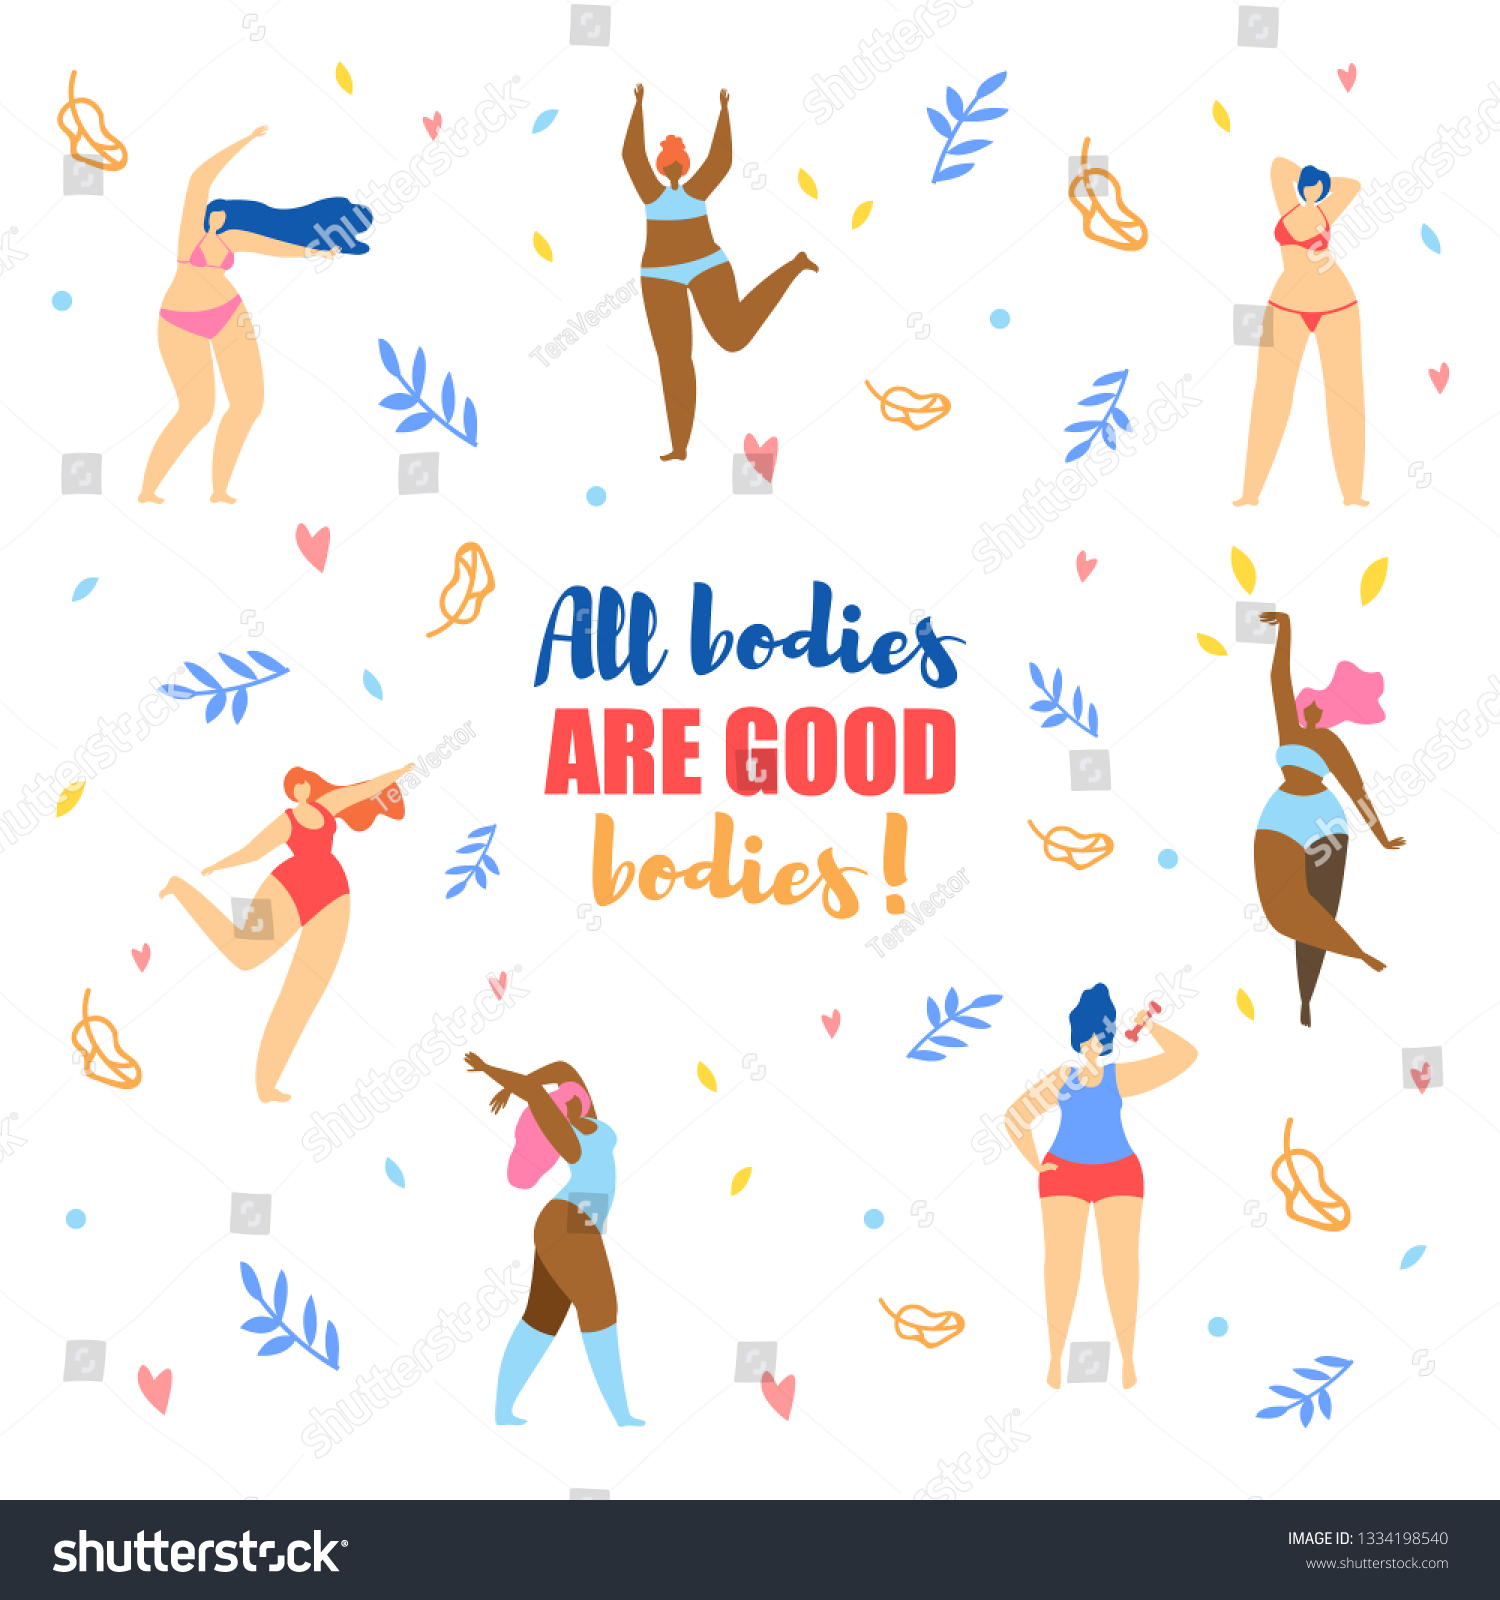 All Bodies Good Bodies Body Positive Stock Vector Royalty Free 1334198540 Shutterstock 